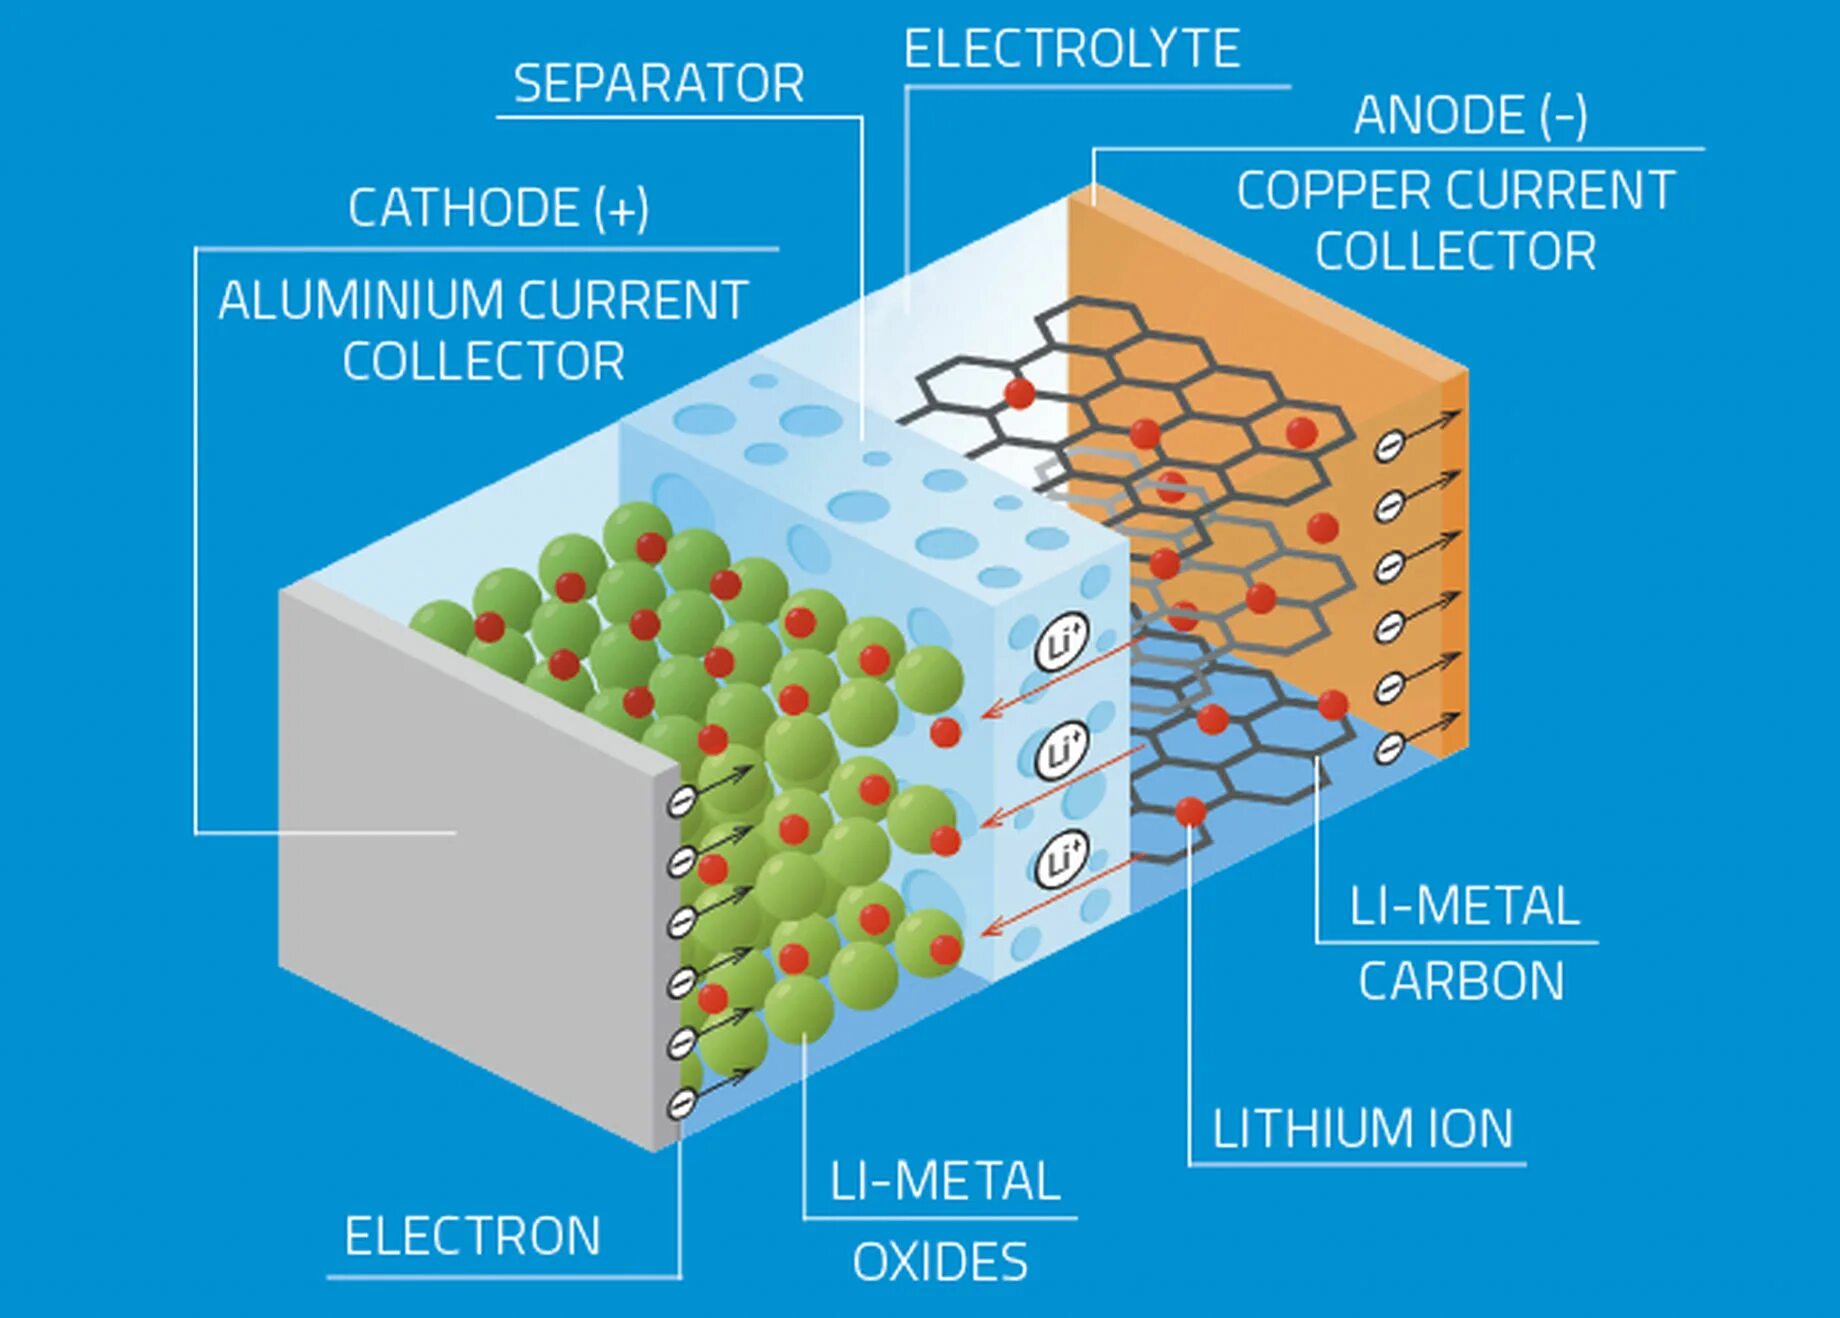 Battery materials. Lithium ion Battery. Lithium ion Batteries recucling. Li ion Battery Laboratory. The structure of the Lithium ion Battery.